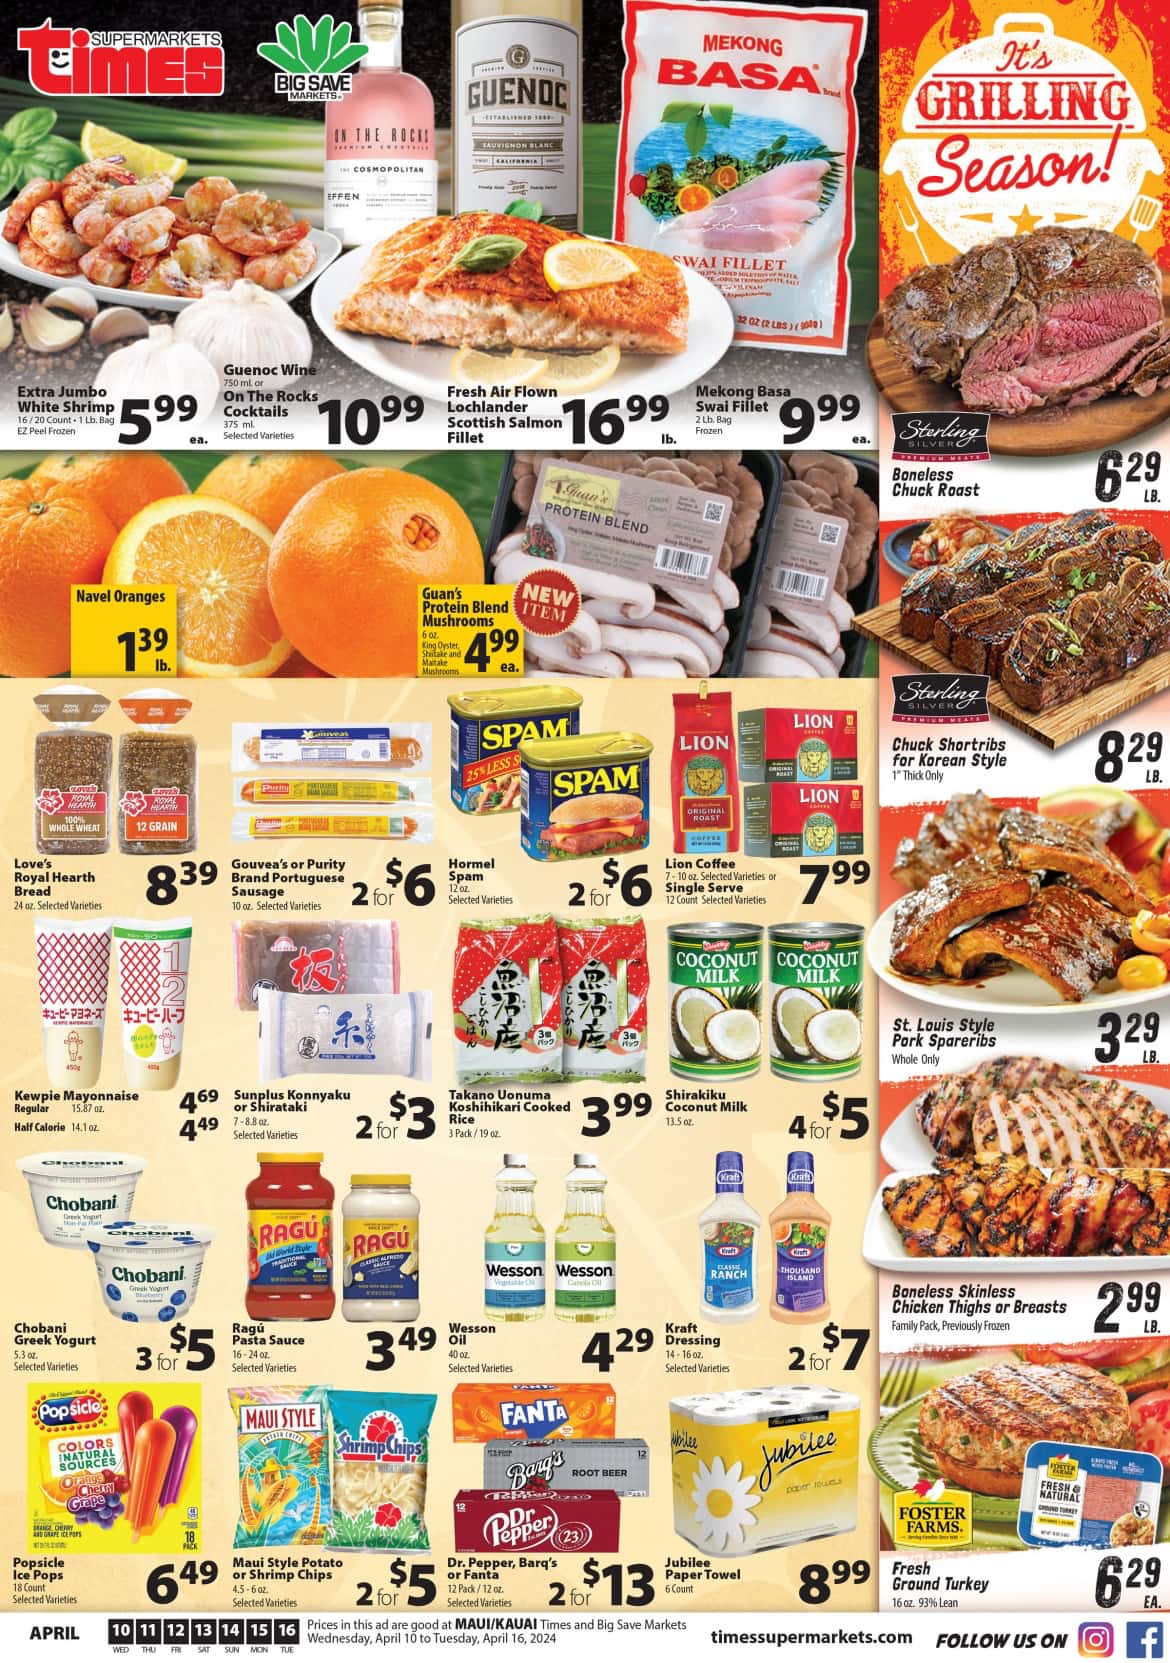 TimesSupermarkets_weekly_ad_041024_01